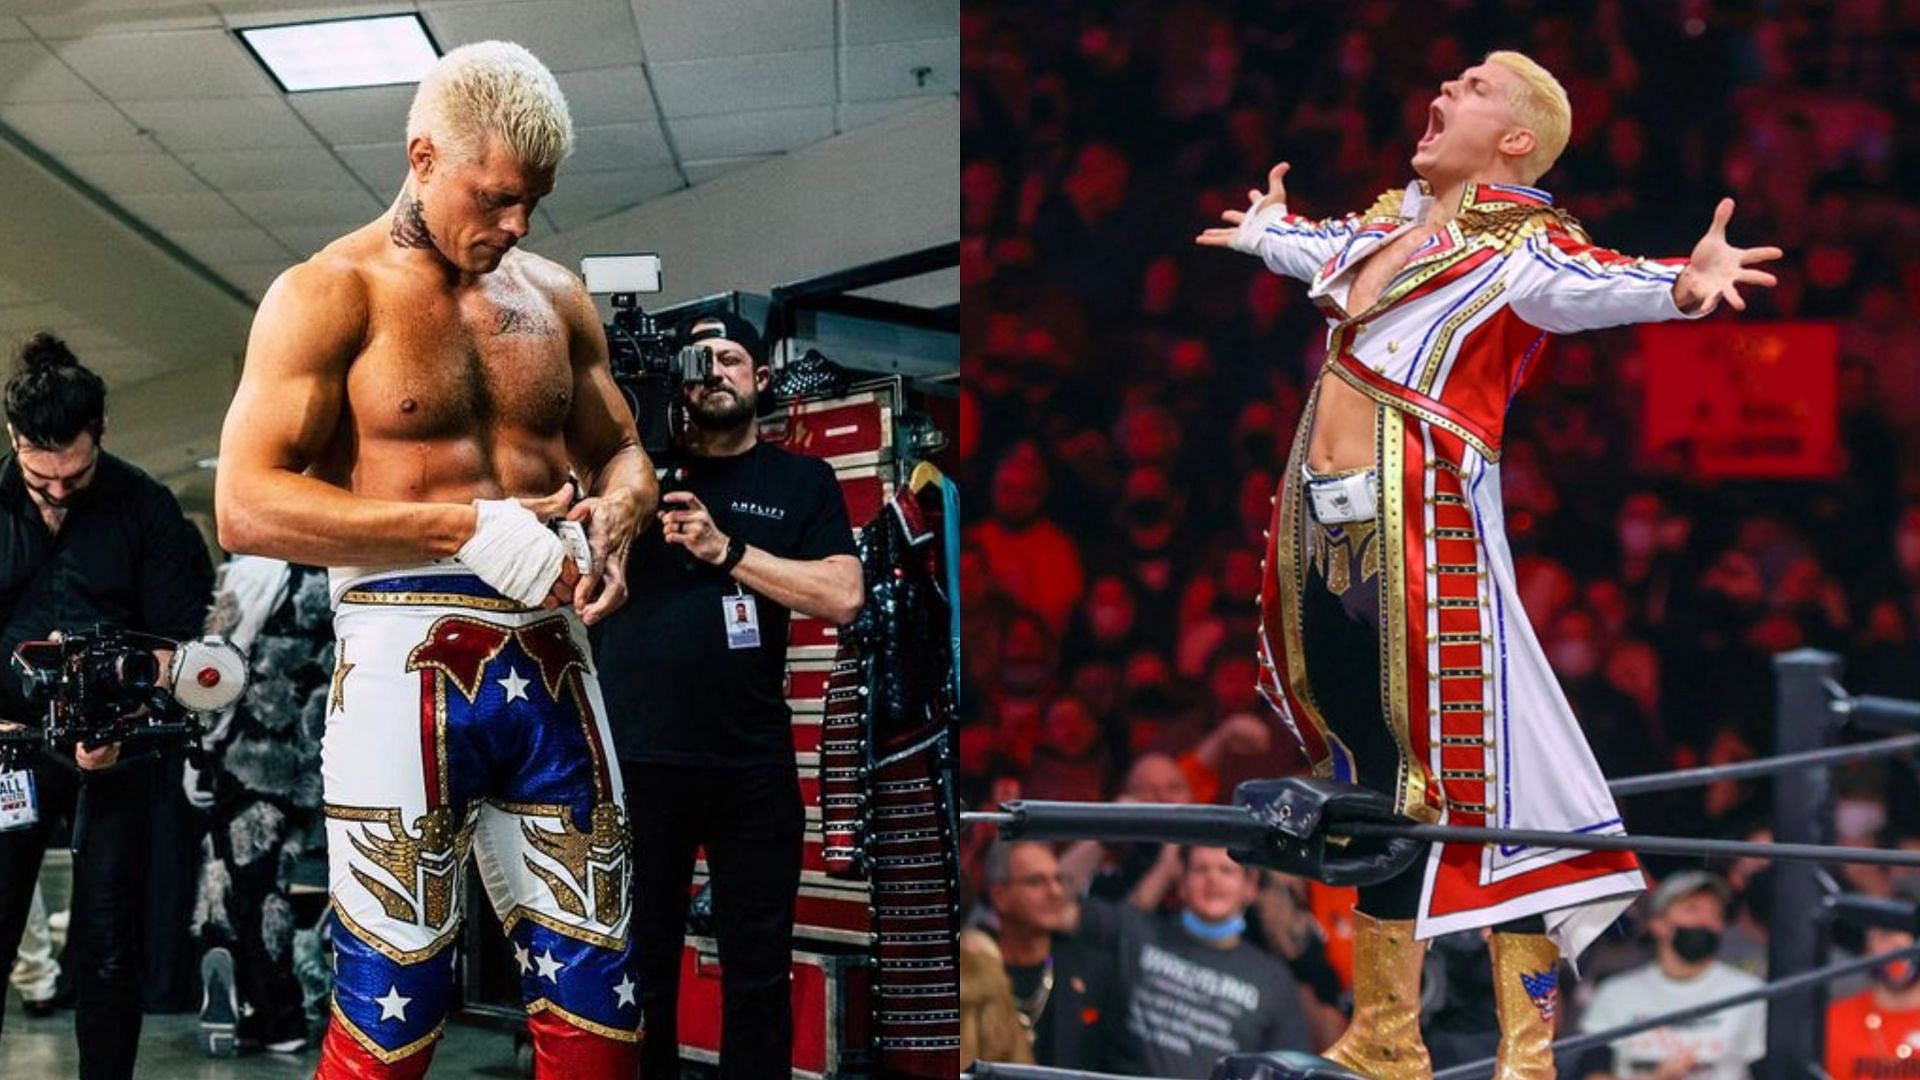 Cody Rhodes is currently the number one contender for the Undisputed WWE Universal Title